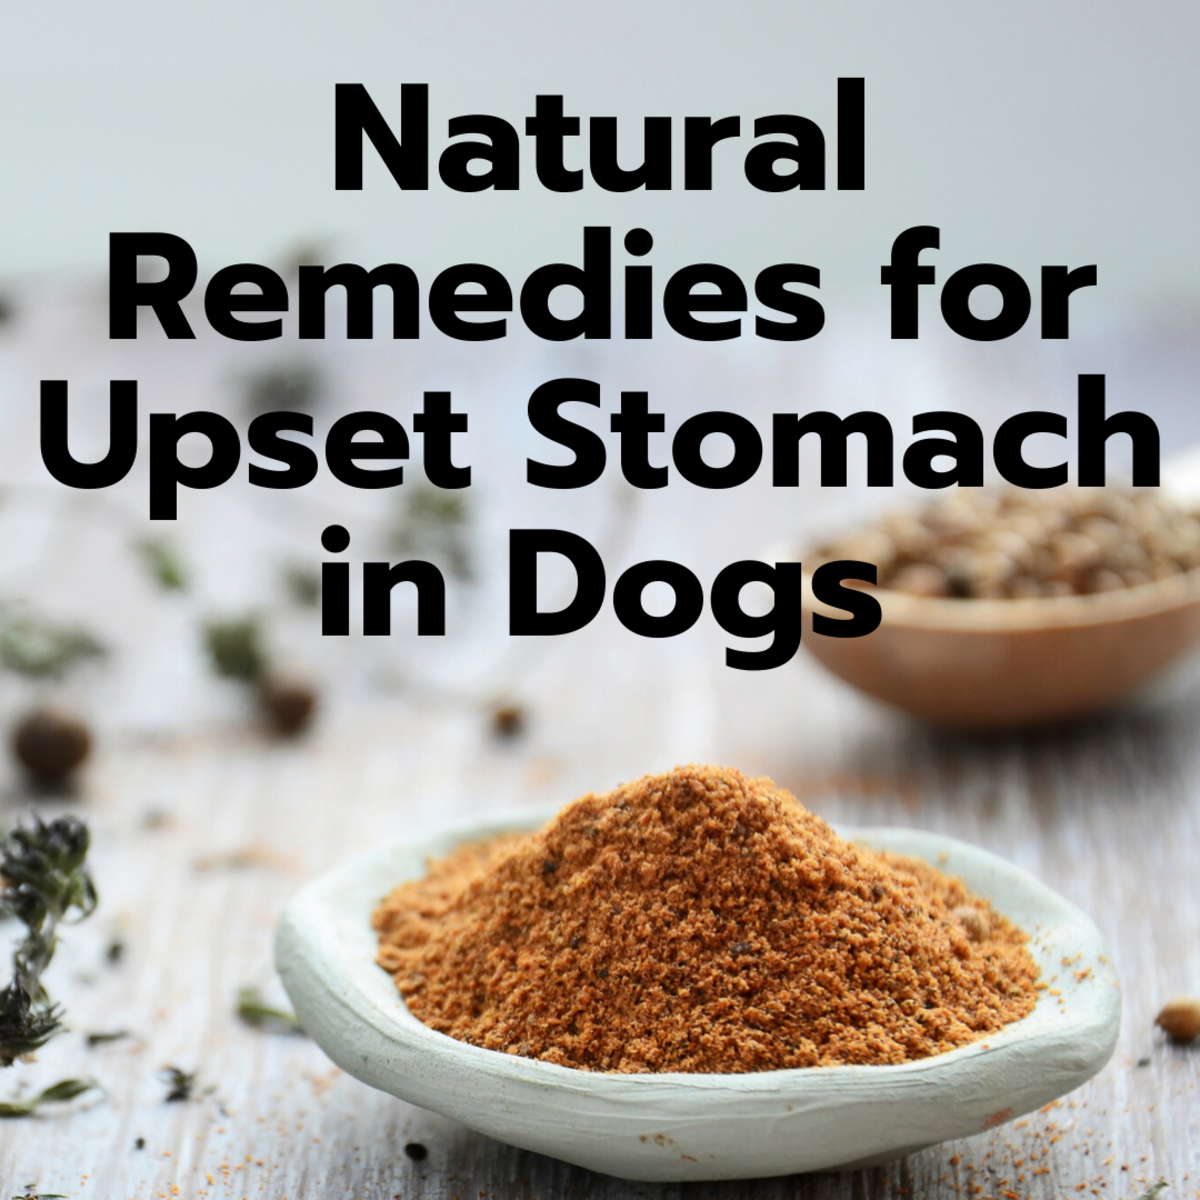 8 Easy Home Remedies for a Dog's Upset Stomach PetHelpful